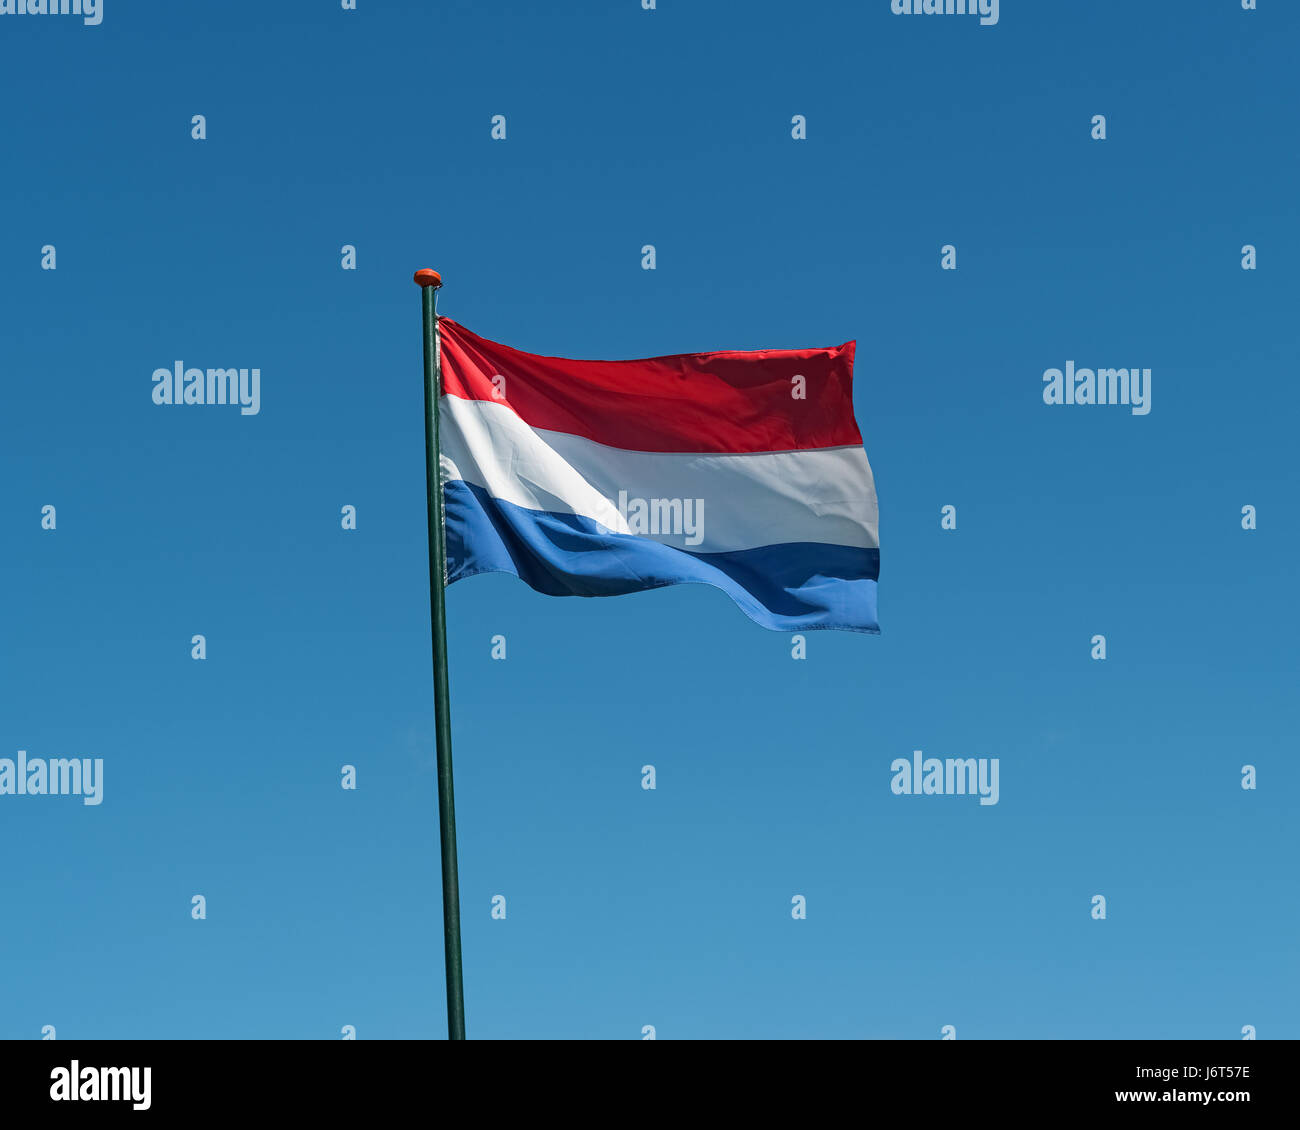 Flag of the Netherlands on flagpole waving in the wind. Netherlands national official flag on blue sky background. Patriotic symbol, banner Stock Photo